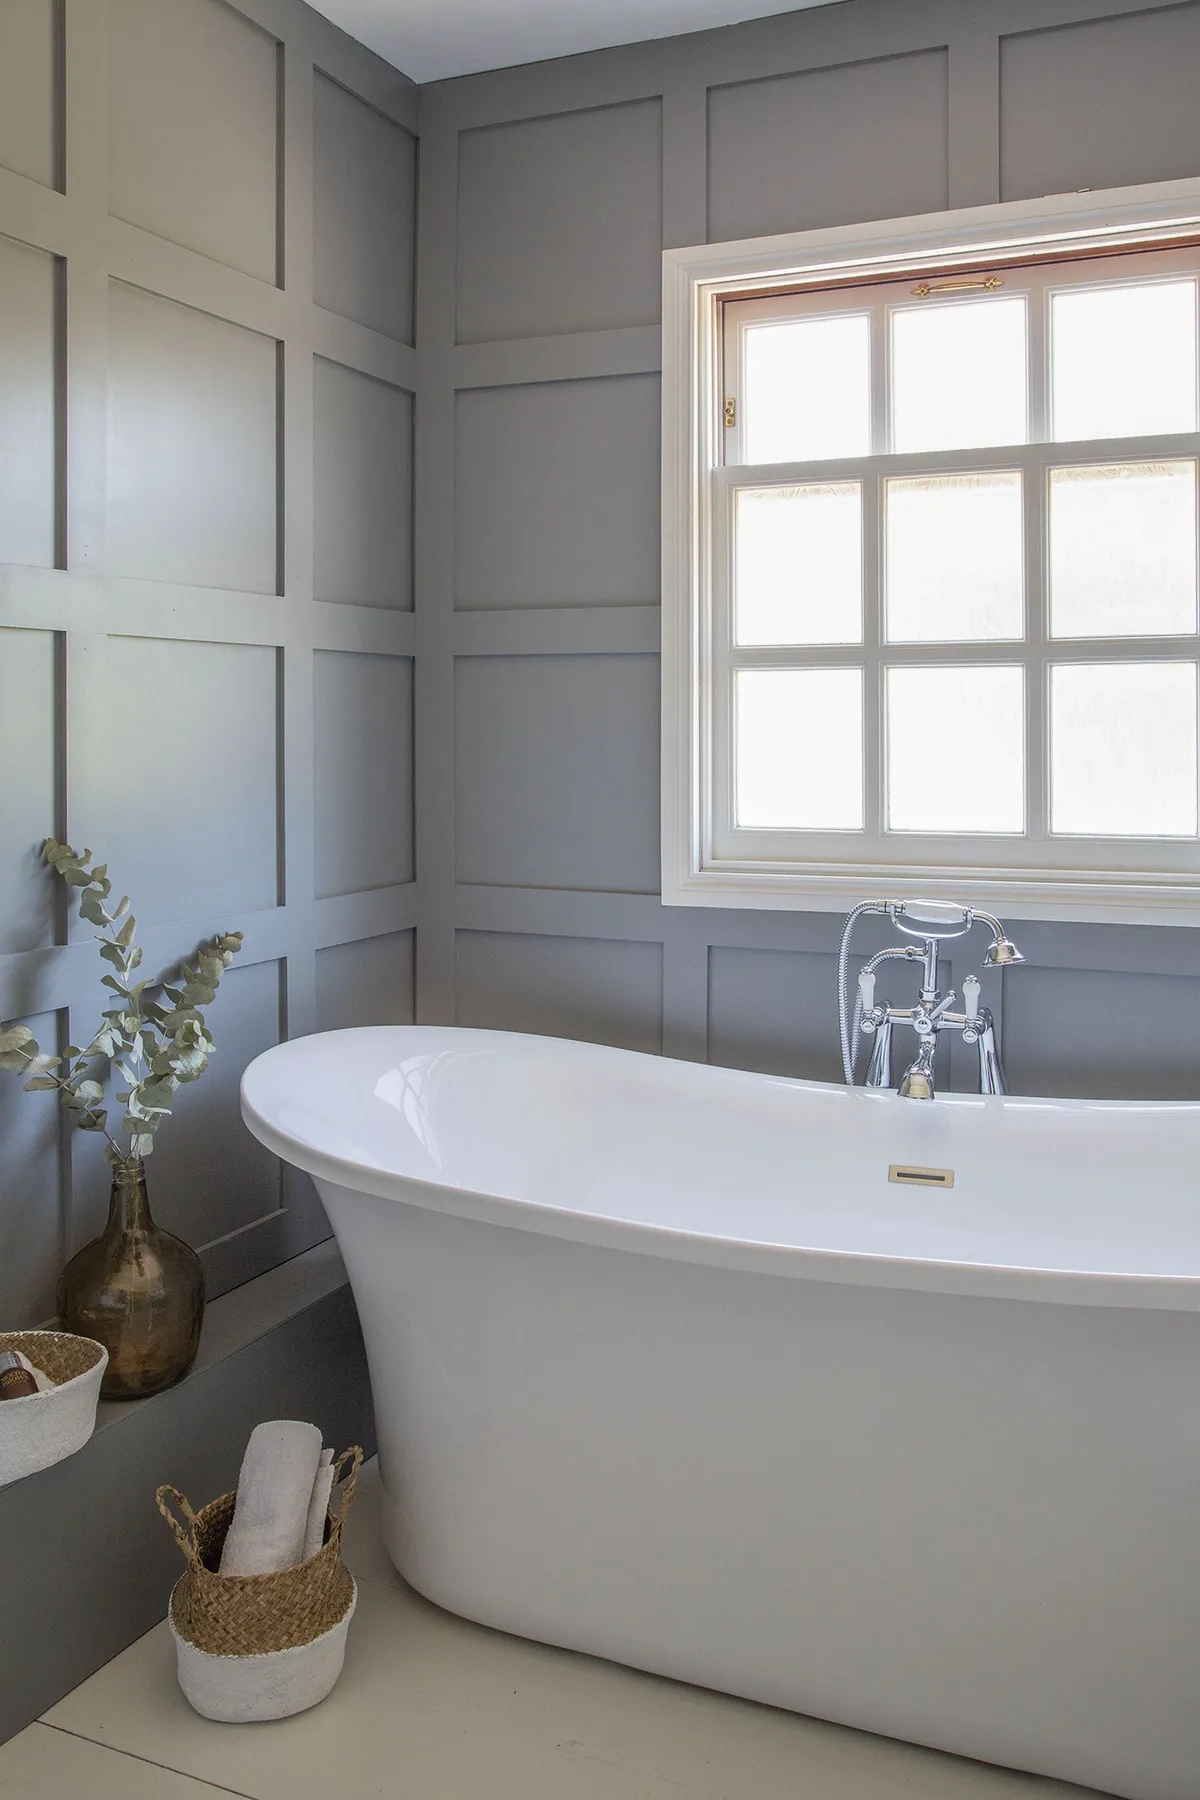 Panelling in moisture-resistant MDF and a free-standing tub give the bathroom a opulent look for less. ‘It’s like I’ve stepped into a luxury hotel every time, and feels even better knowing we did it on a tight budget,’ reveals Vicky